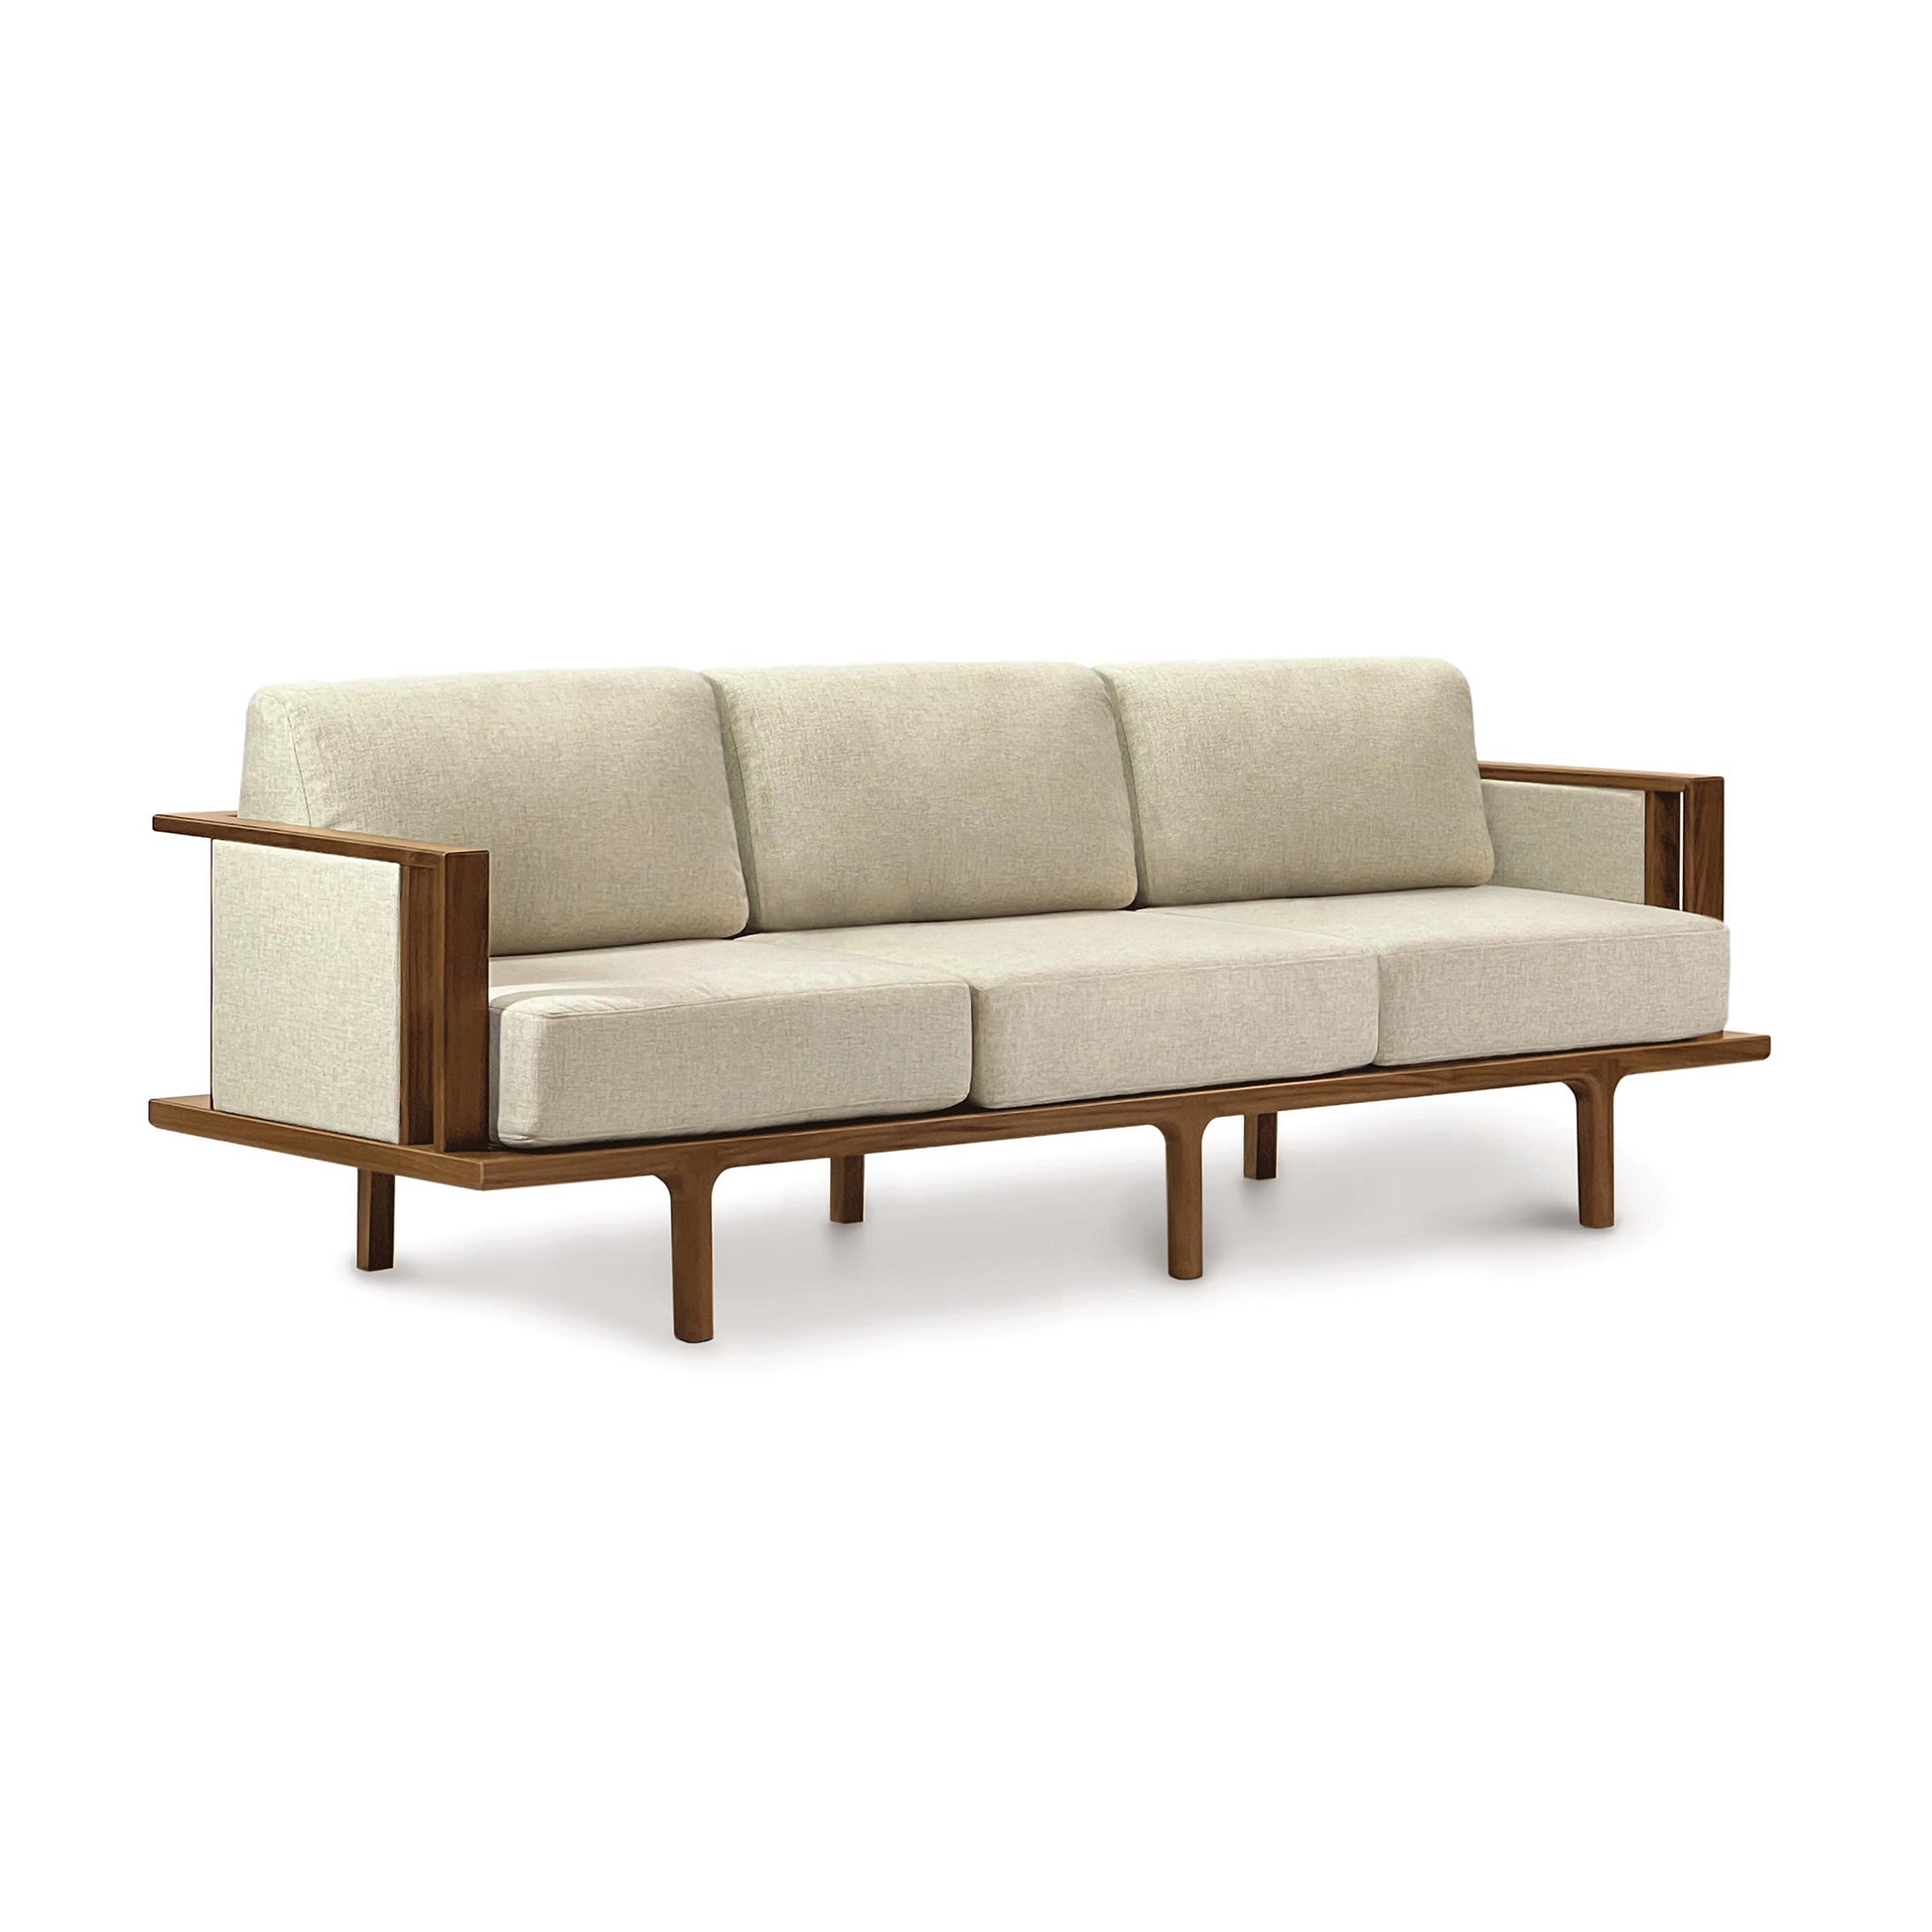 The Sierra Walnut Upholstered Sofa with Upholstered Panels by Copeland Furniture features a contemporary design with a wooden frame and beige fabric.